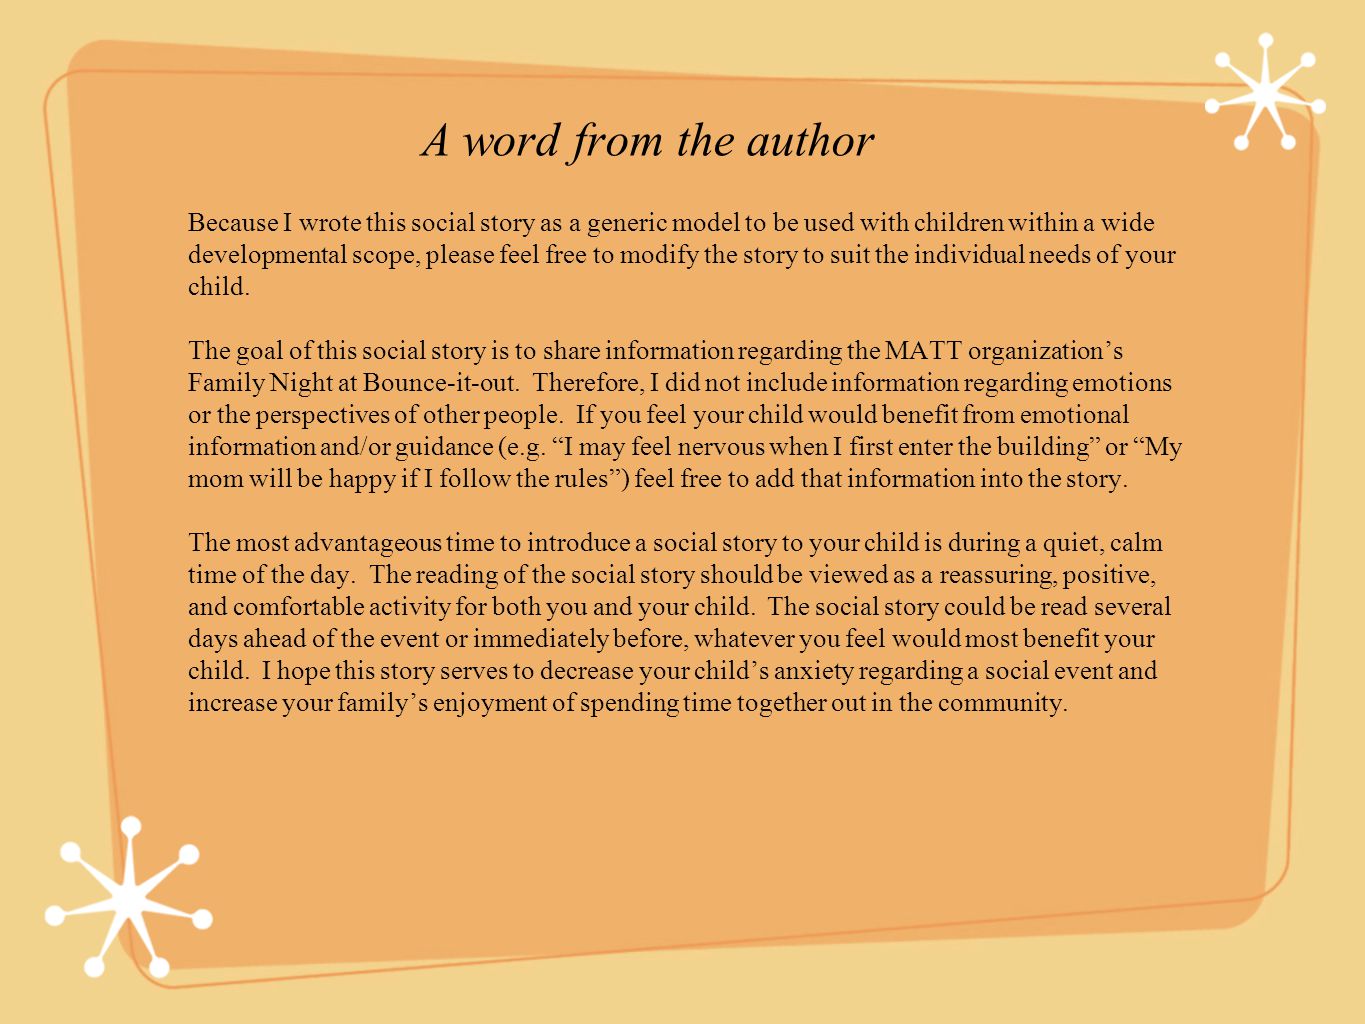 A word from the author Because I wrote this social story as a generic model to be used with children within a wide developmental scope, please feel free to modify the story to suit the individual needs of your child.